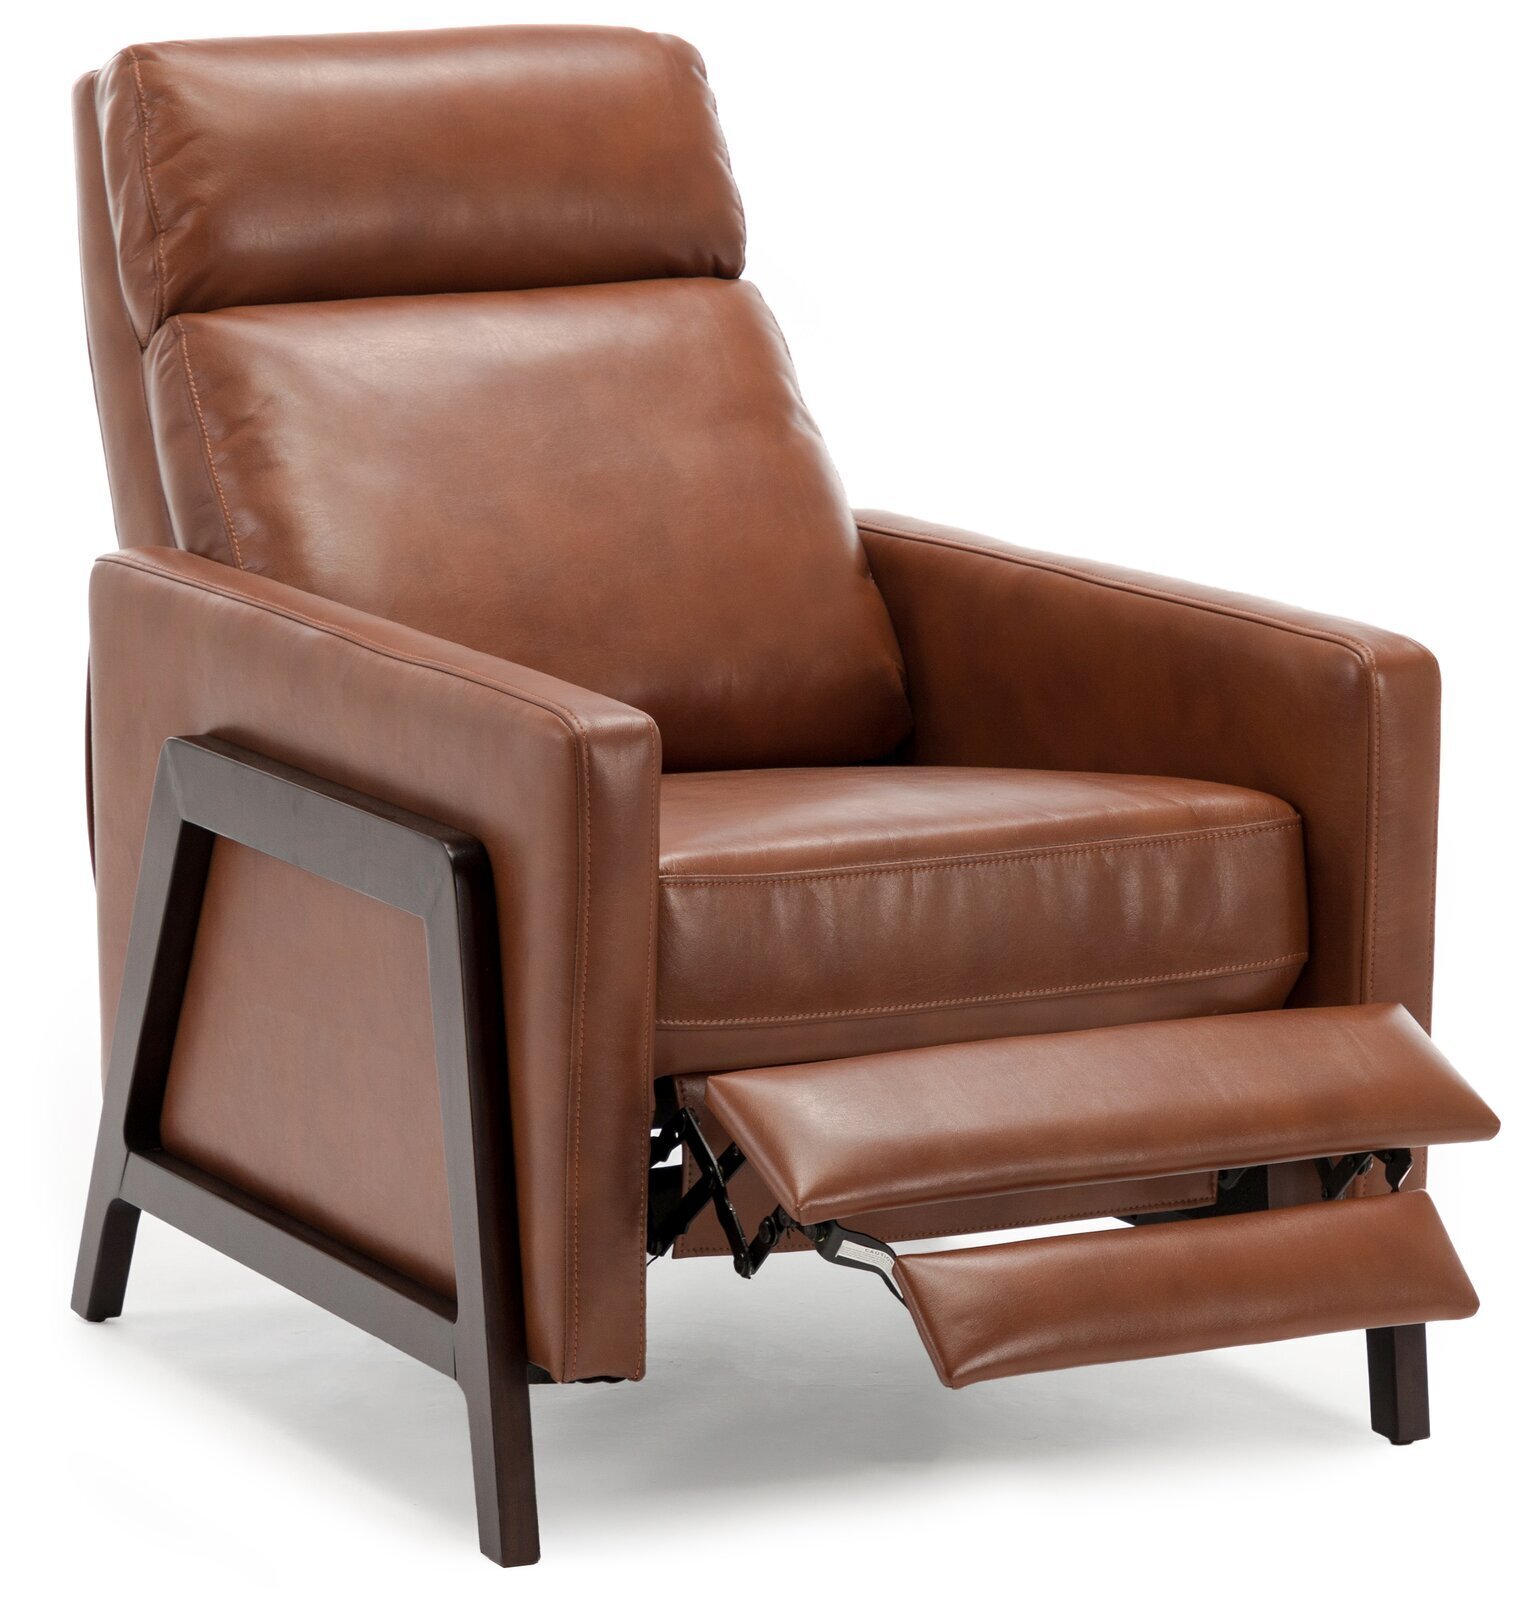 Faux Leather Manual Reclining Chair